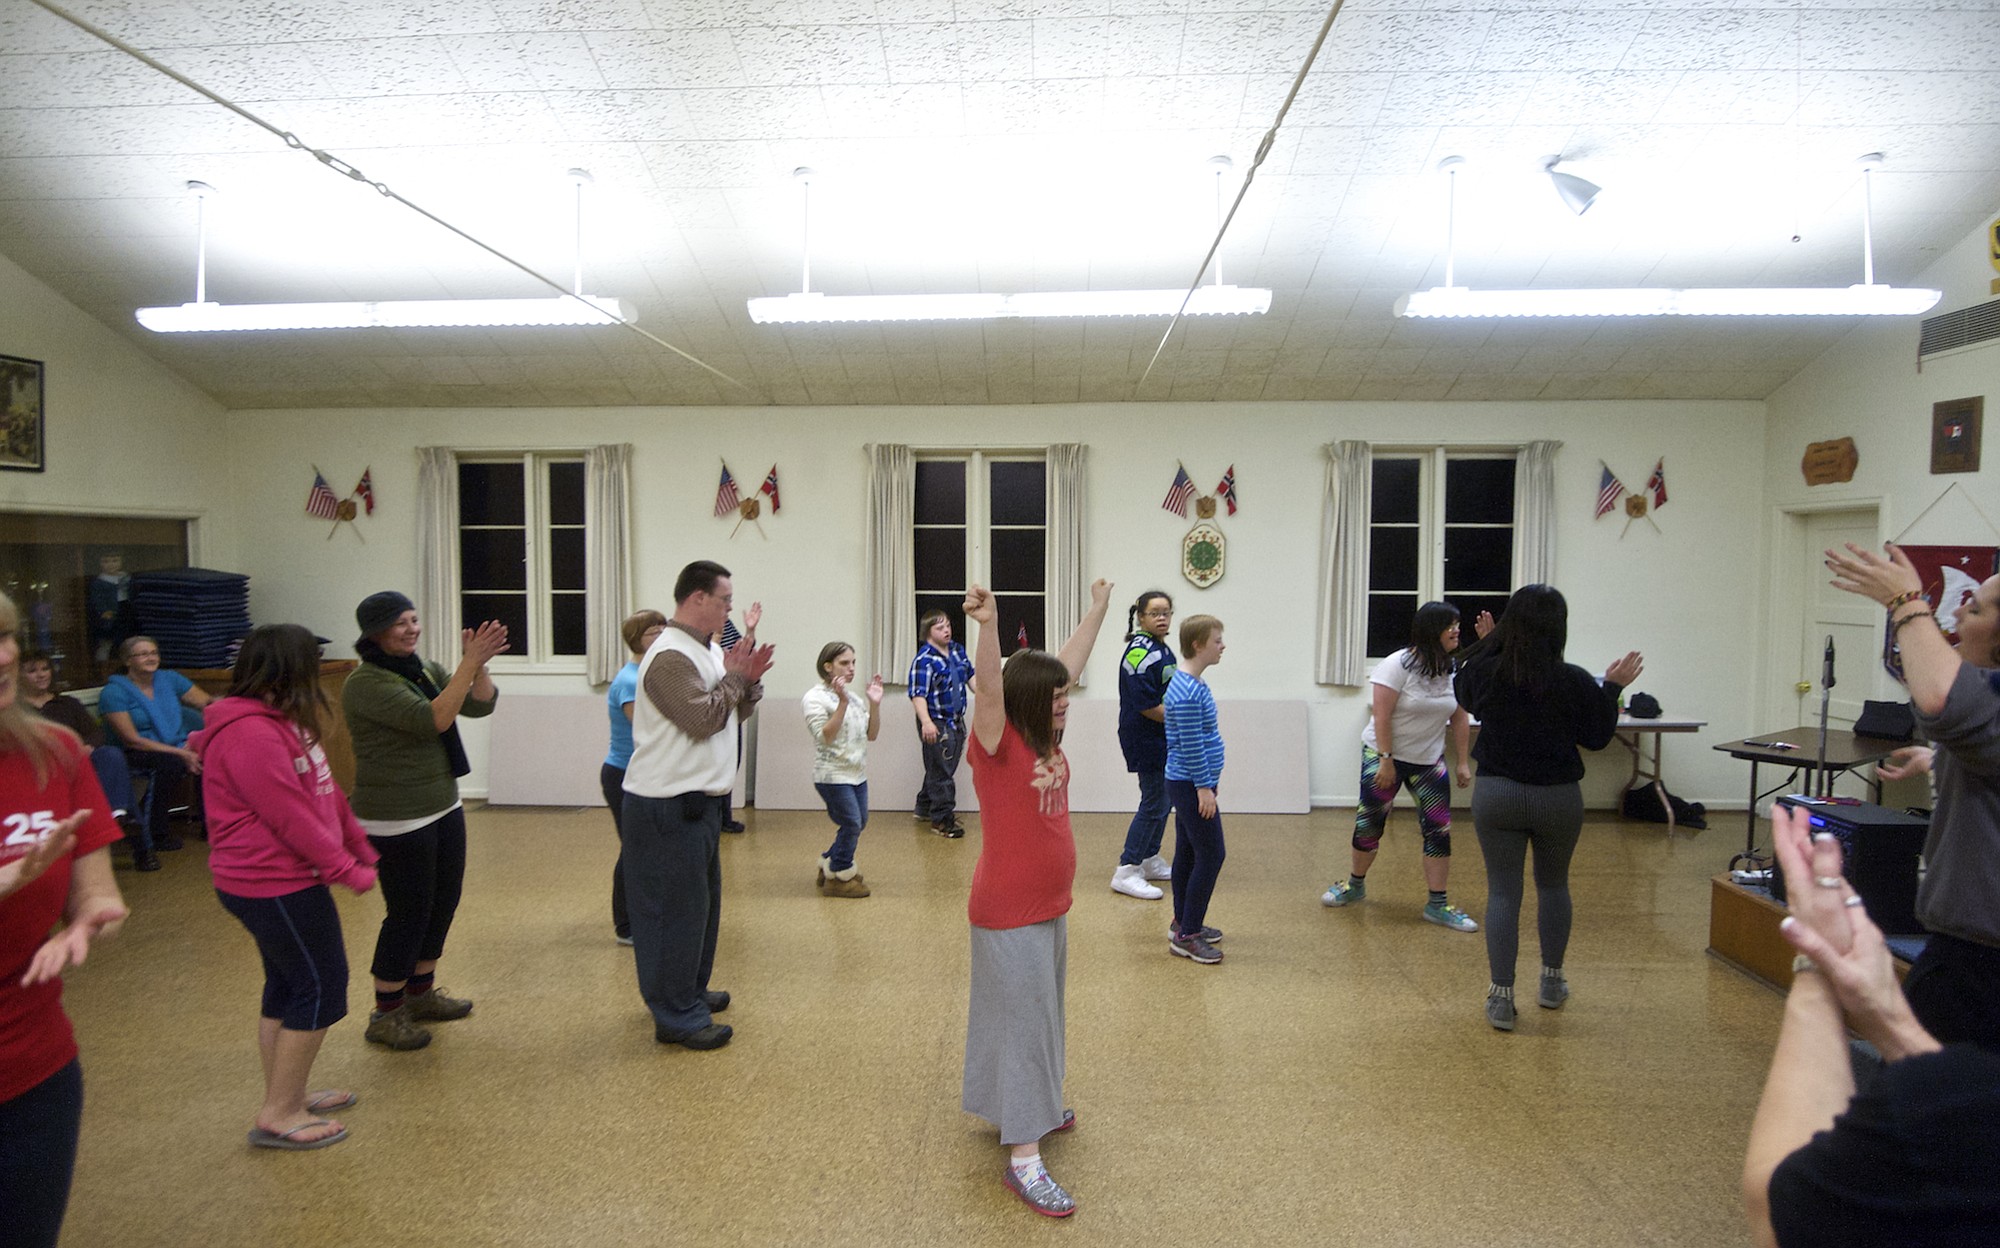 Students cheer after learning parts of a new dance routine during a hip-hop dance class geared toward people with developmental disabilities.